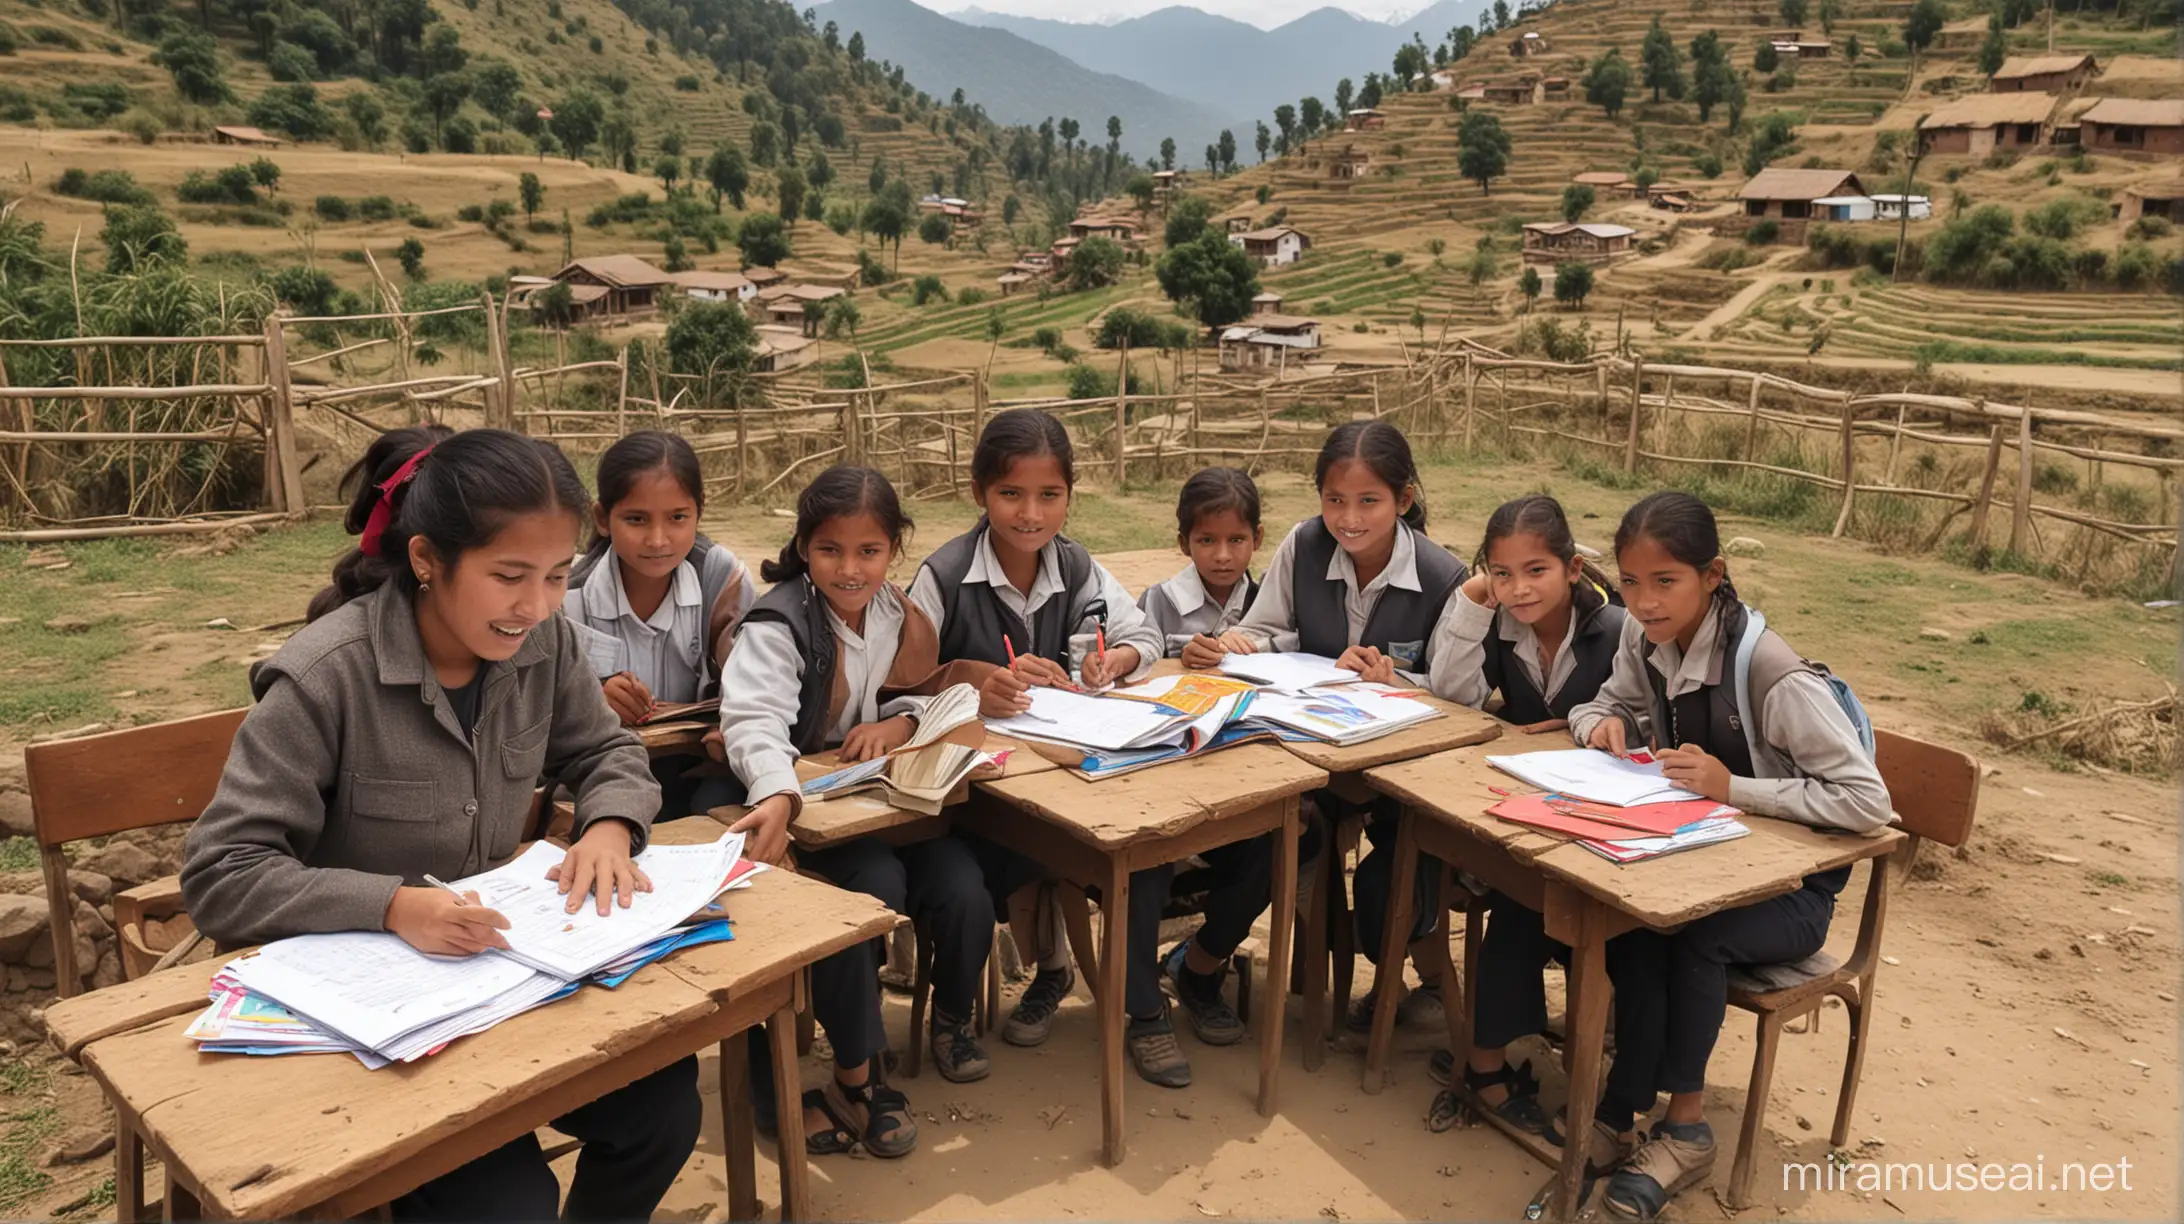 Monitoring and Evaluation of Education Project in Rural Nepal